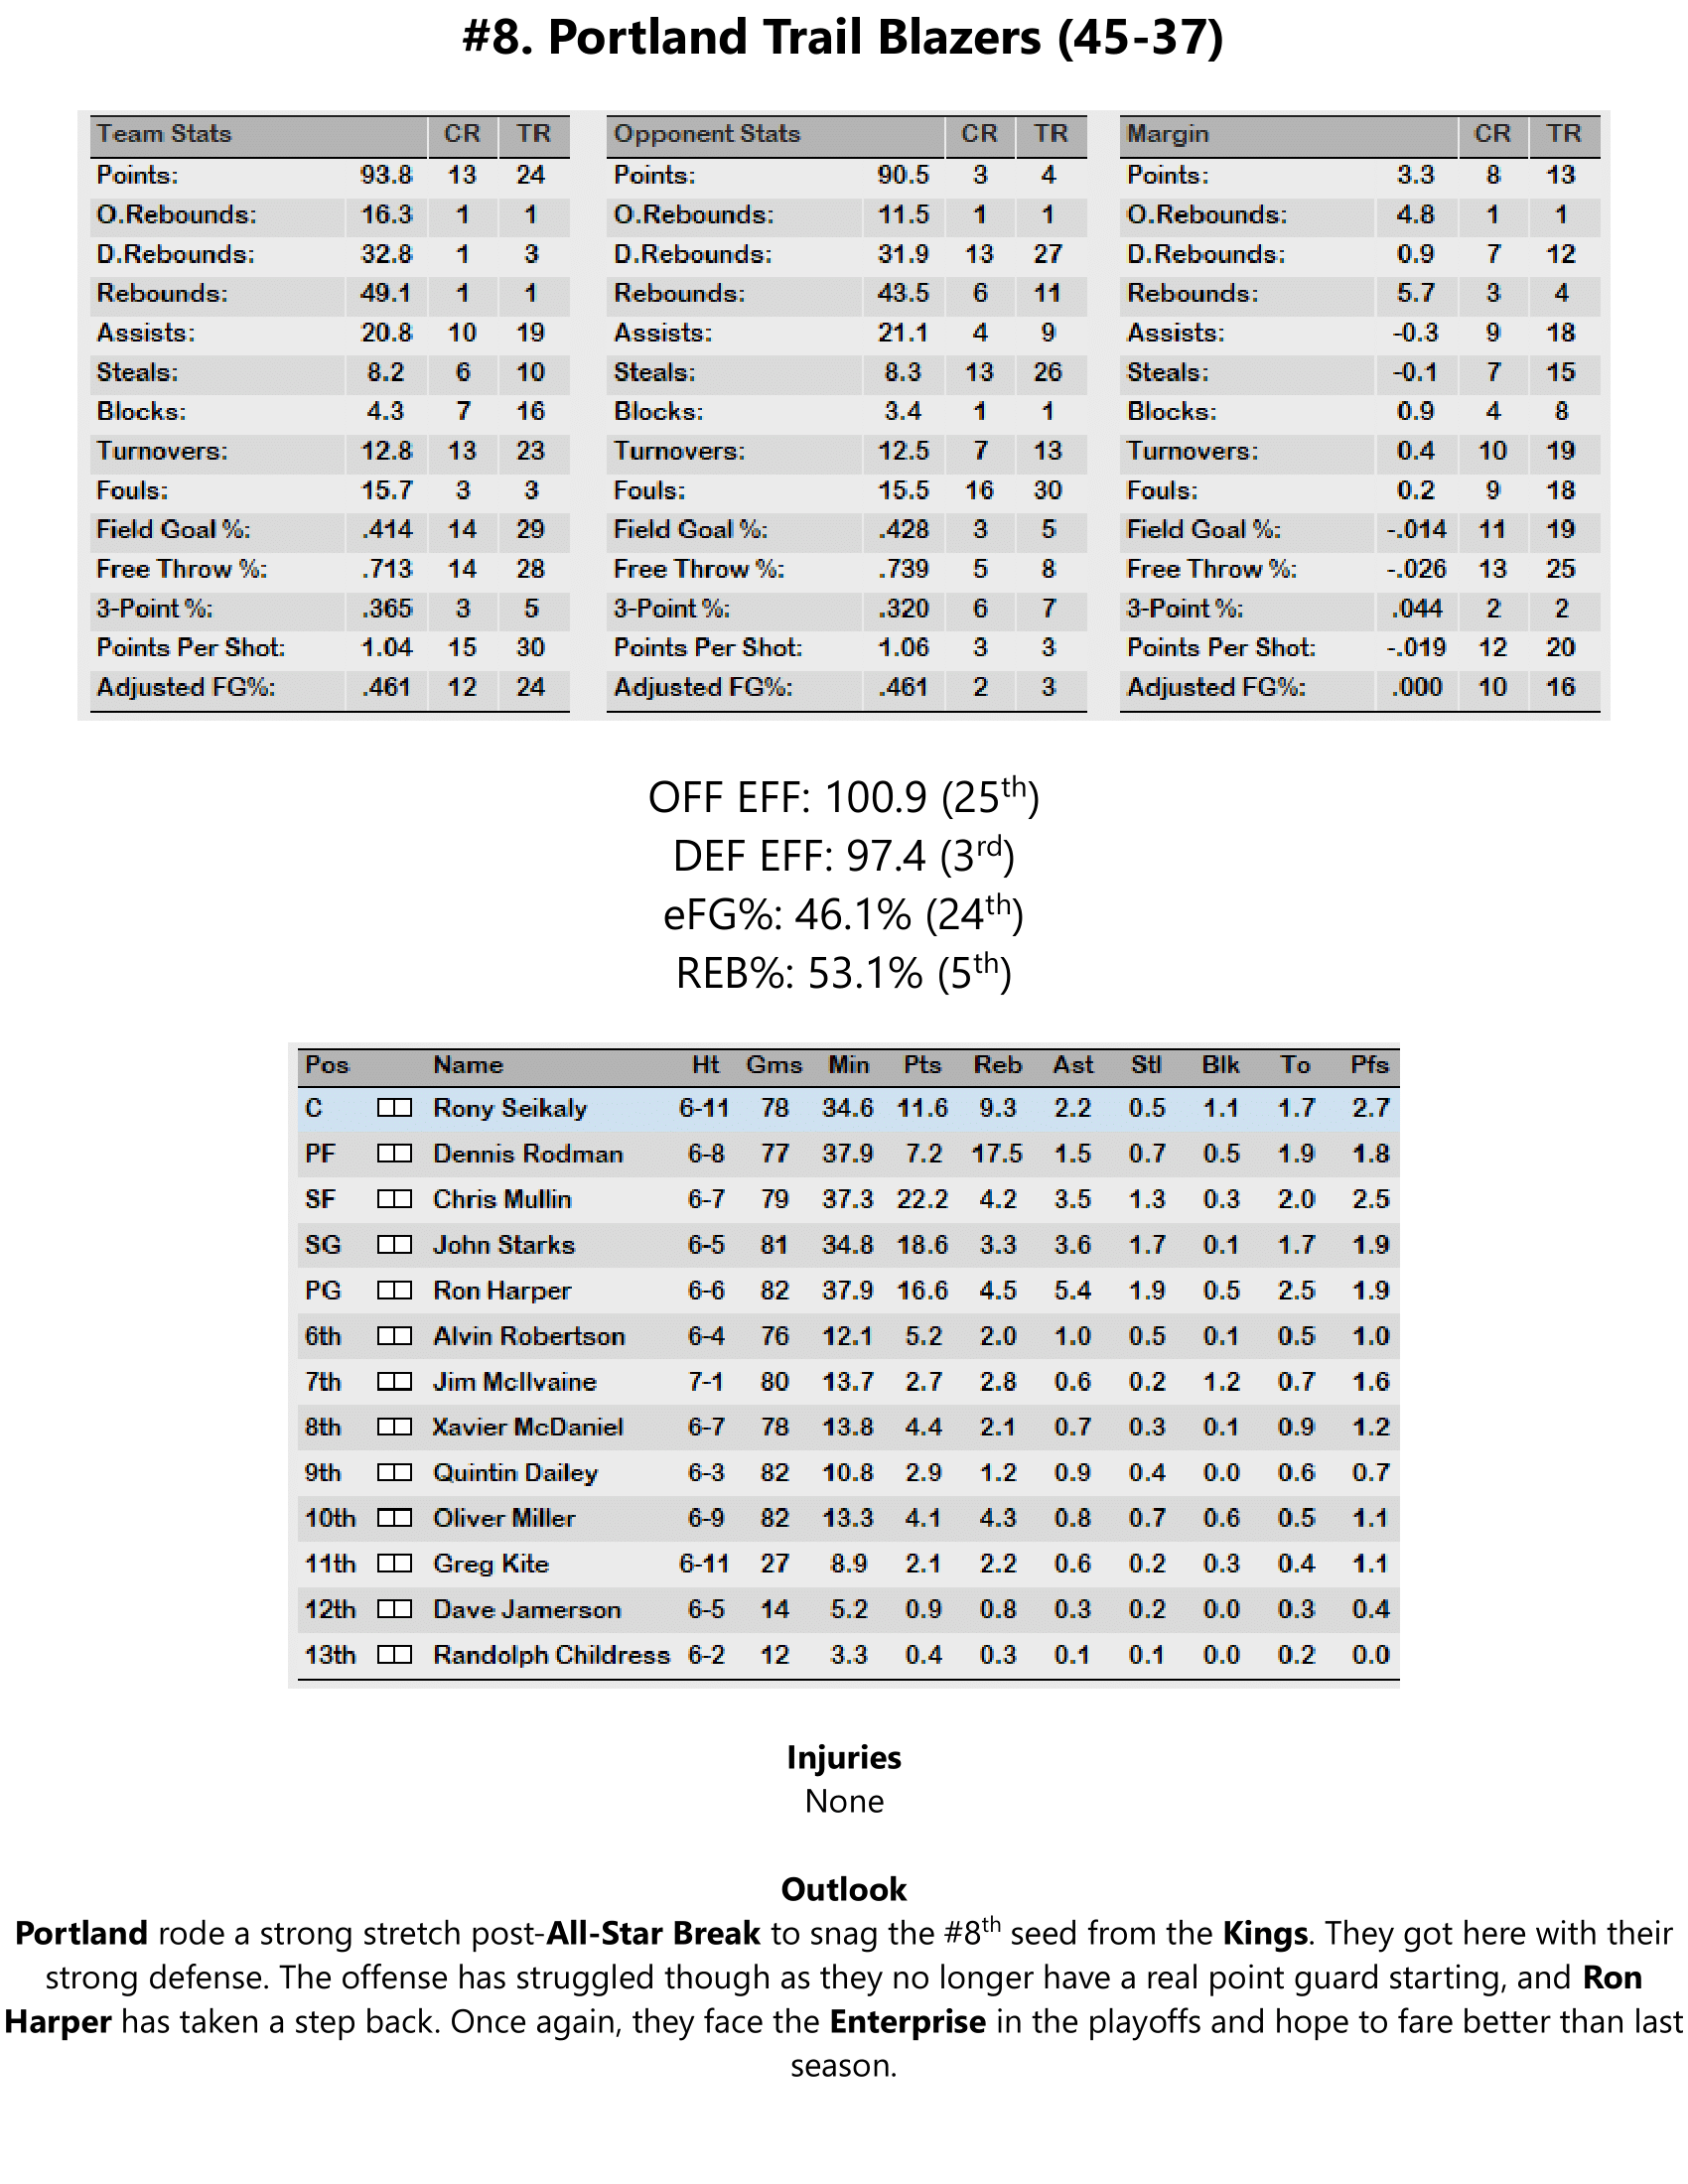 95-96-Part-3-Playoff-Preview-09.png